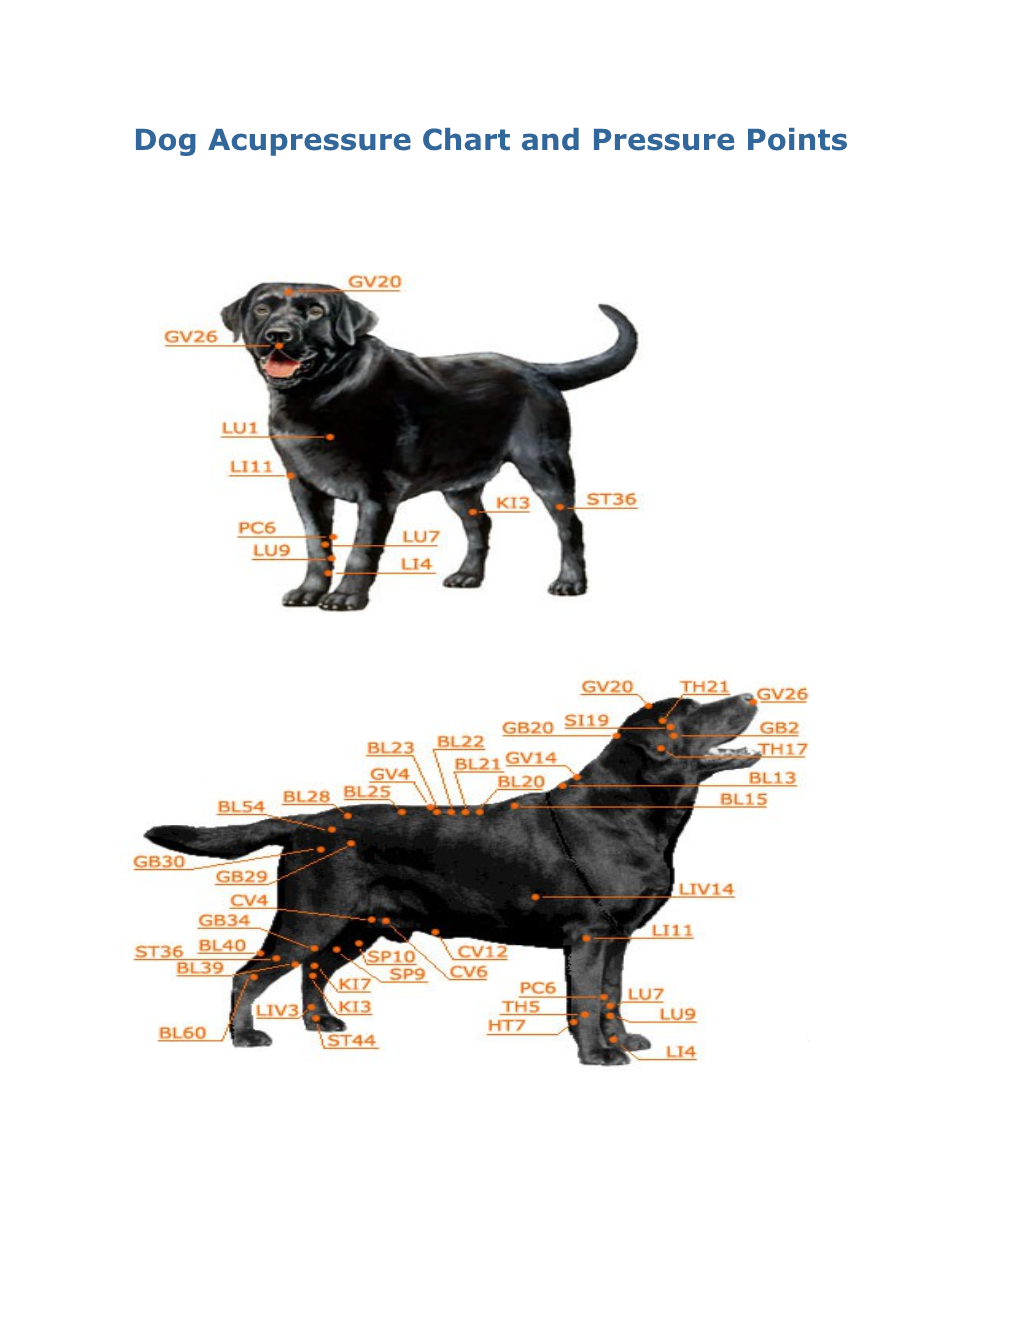 Dog Acupressure Chart and Pressure Points